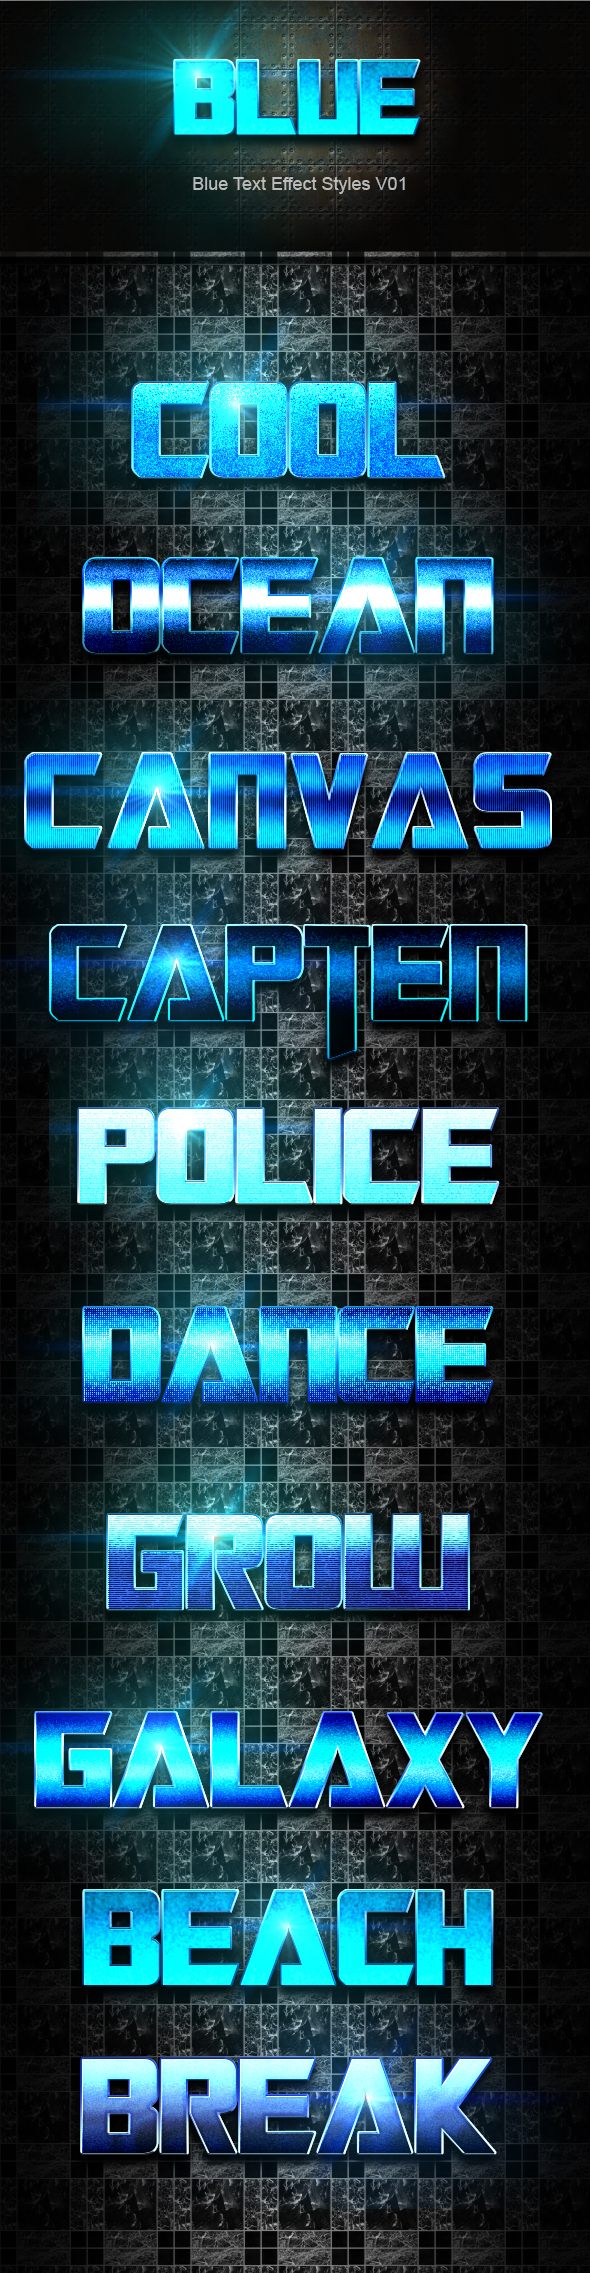 [DOWNLOAD]Blue Text Effect Styles V01